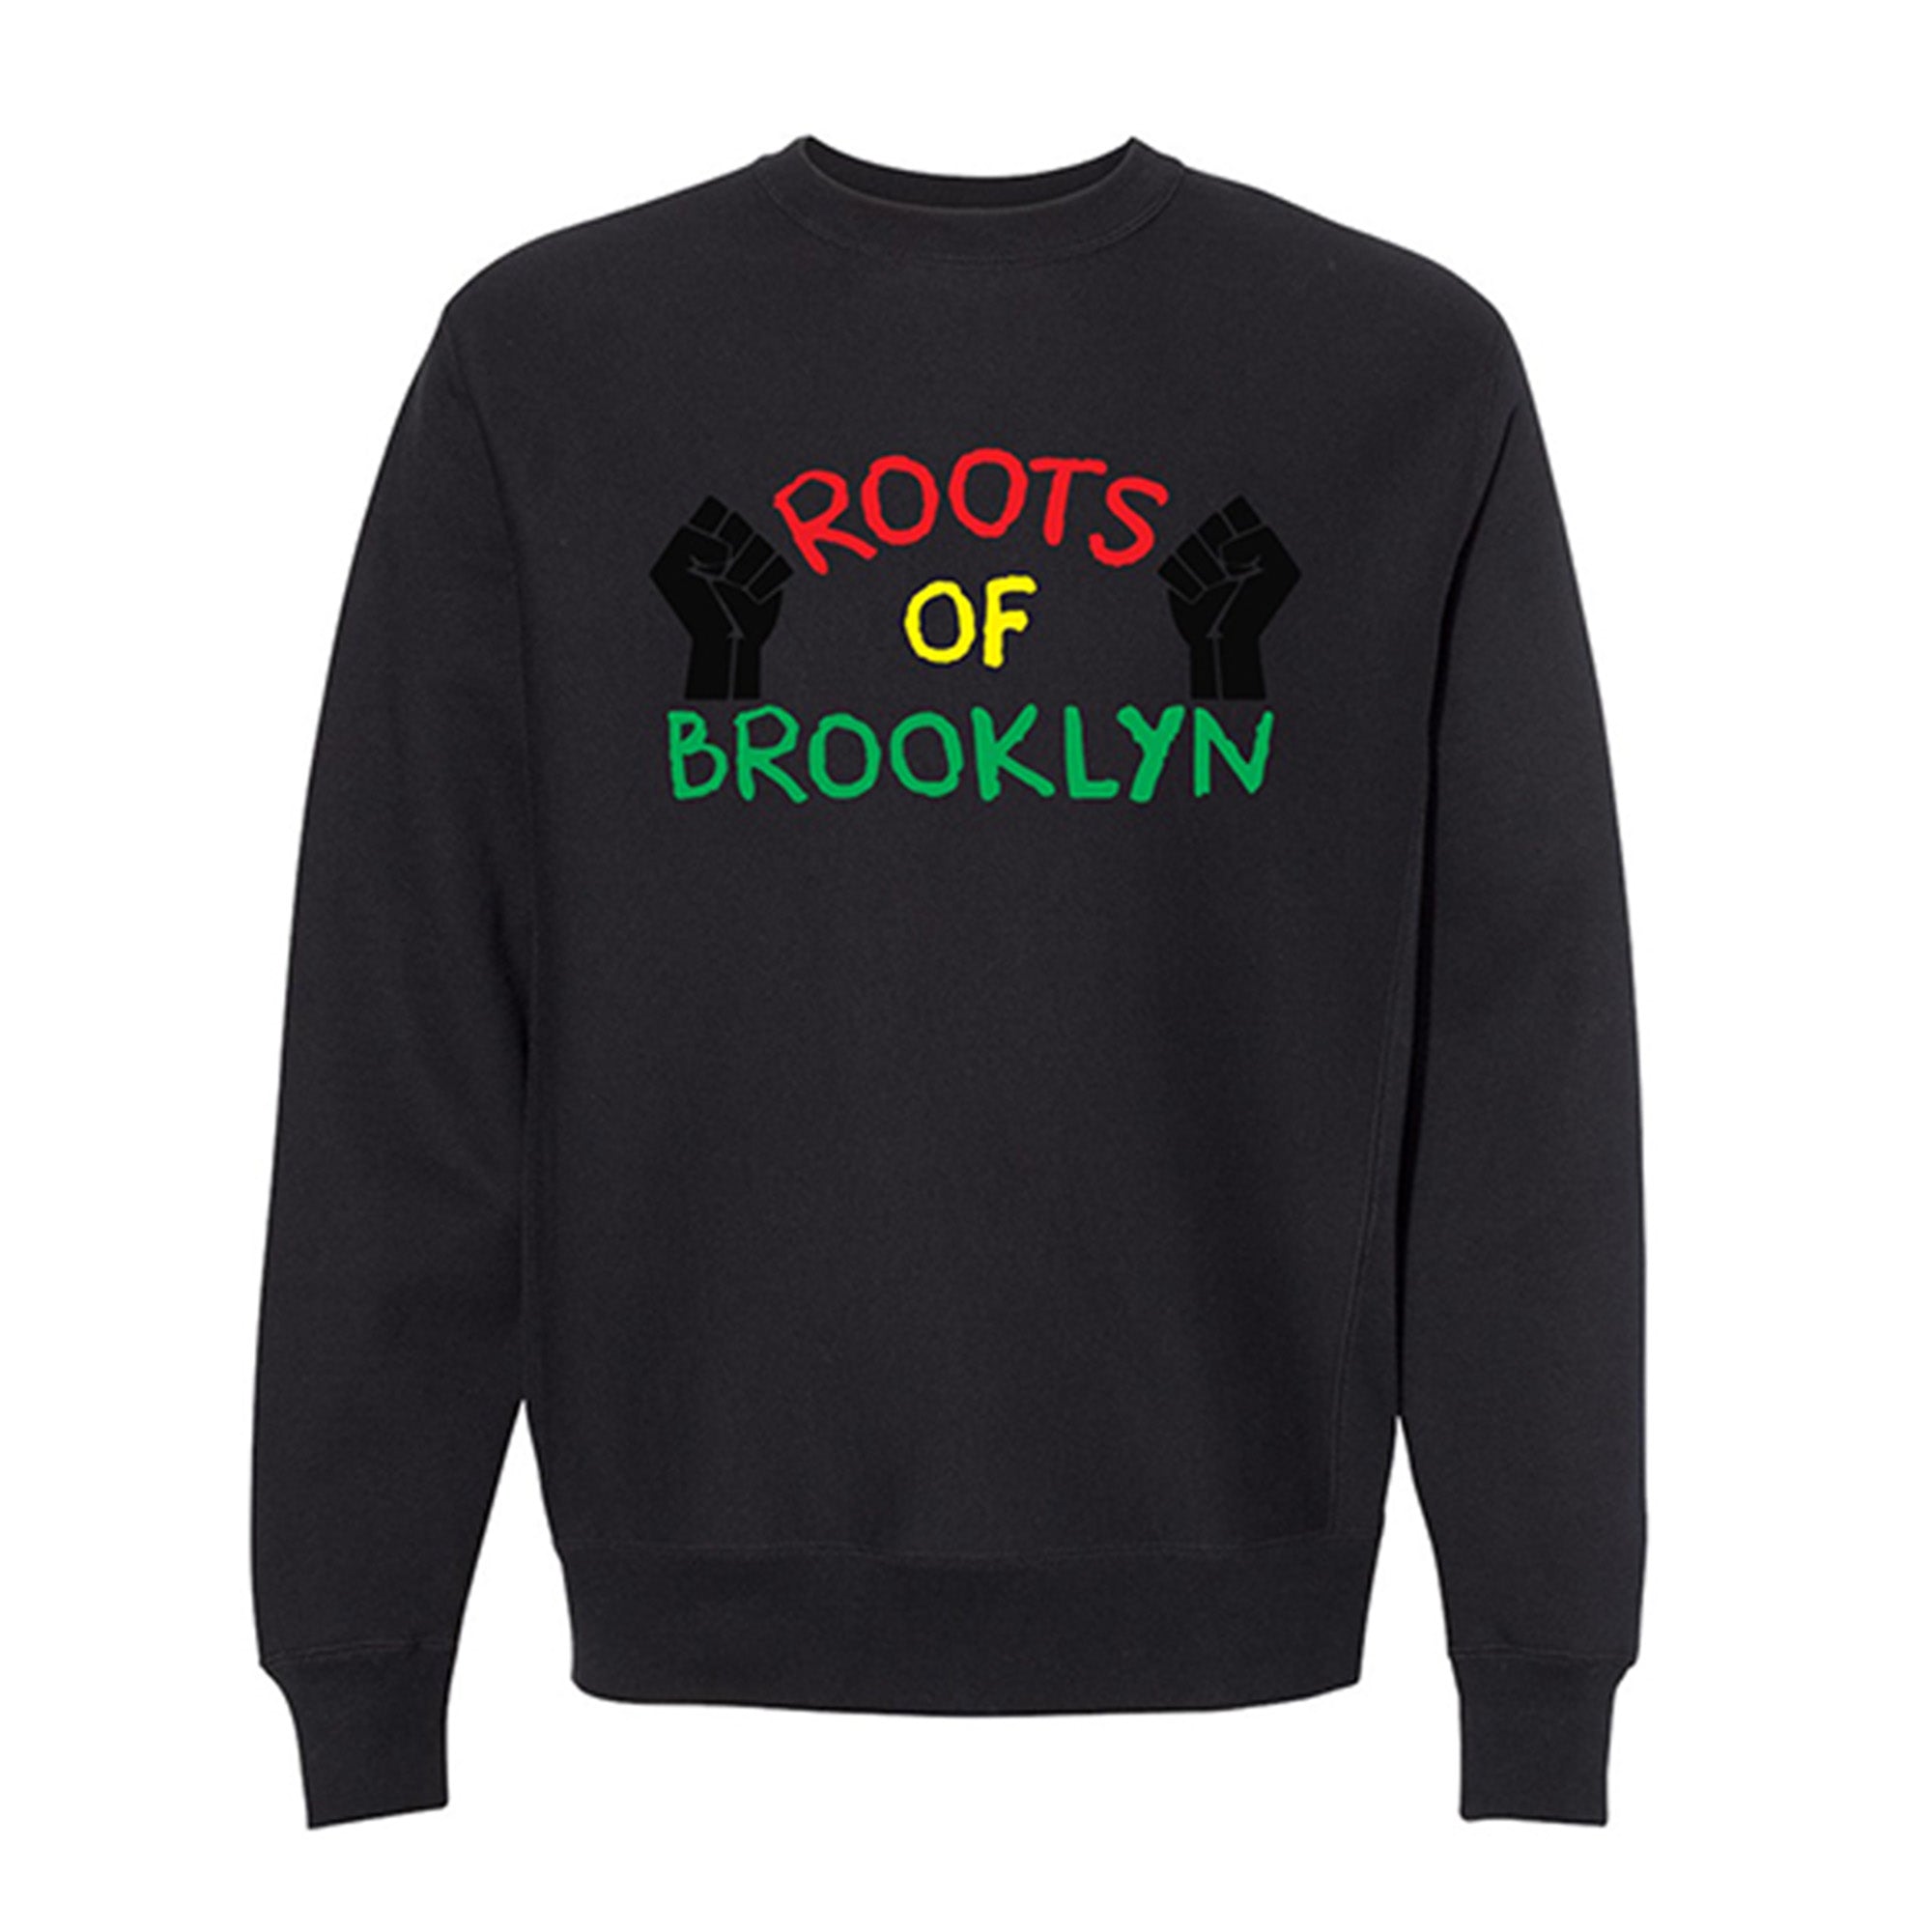 Classic Black Crew Neck sweater “The Juneteenth Edition”